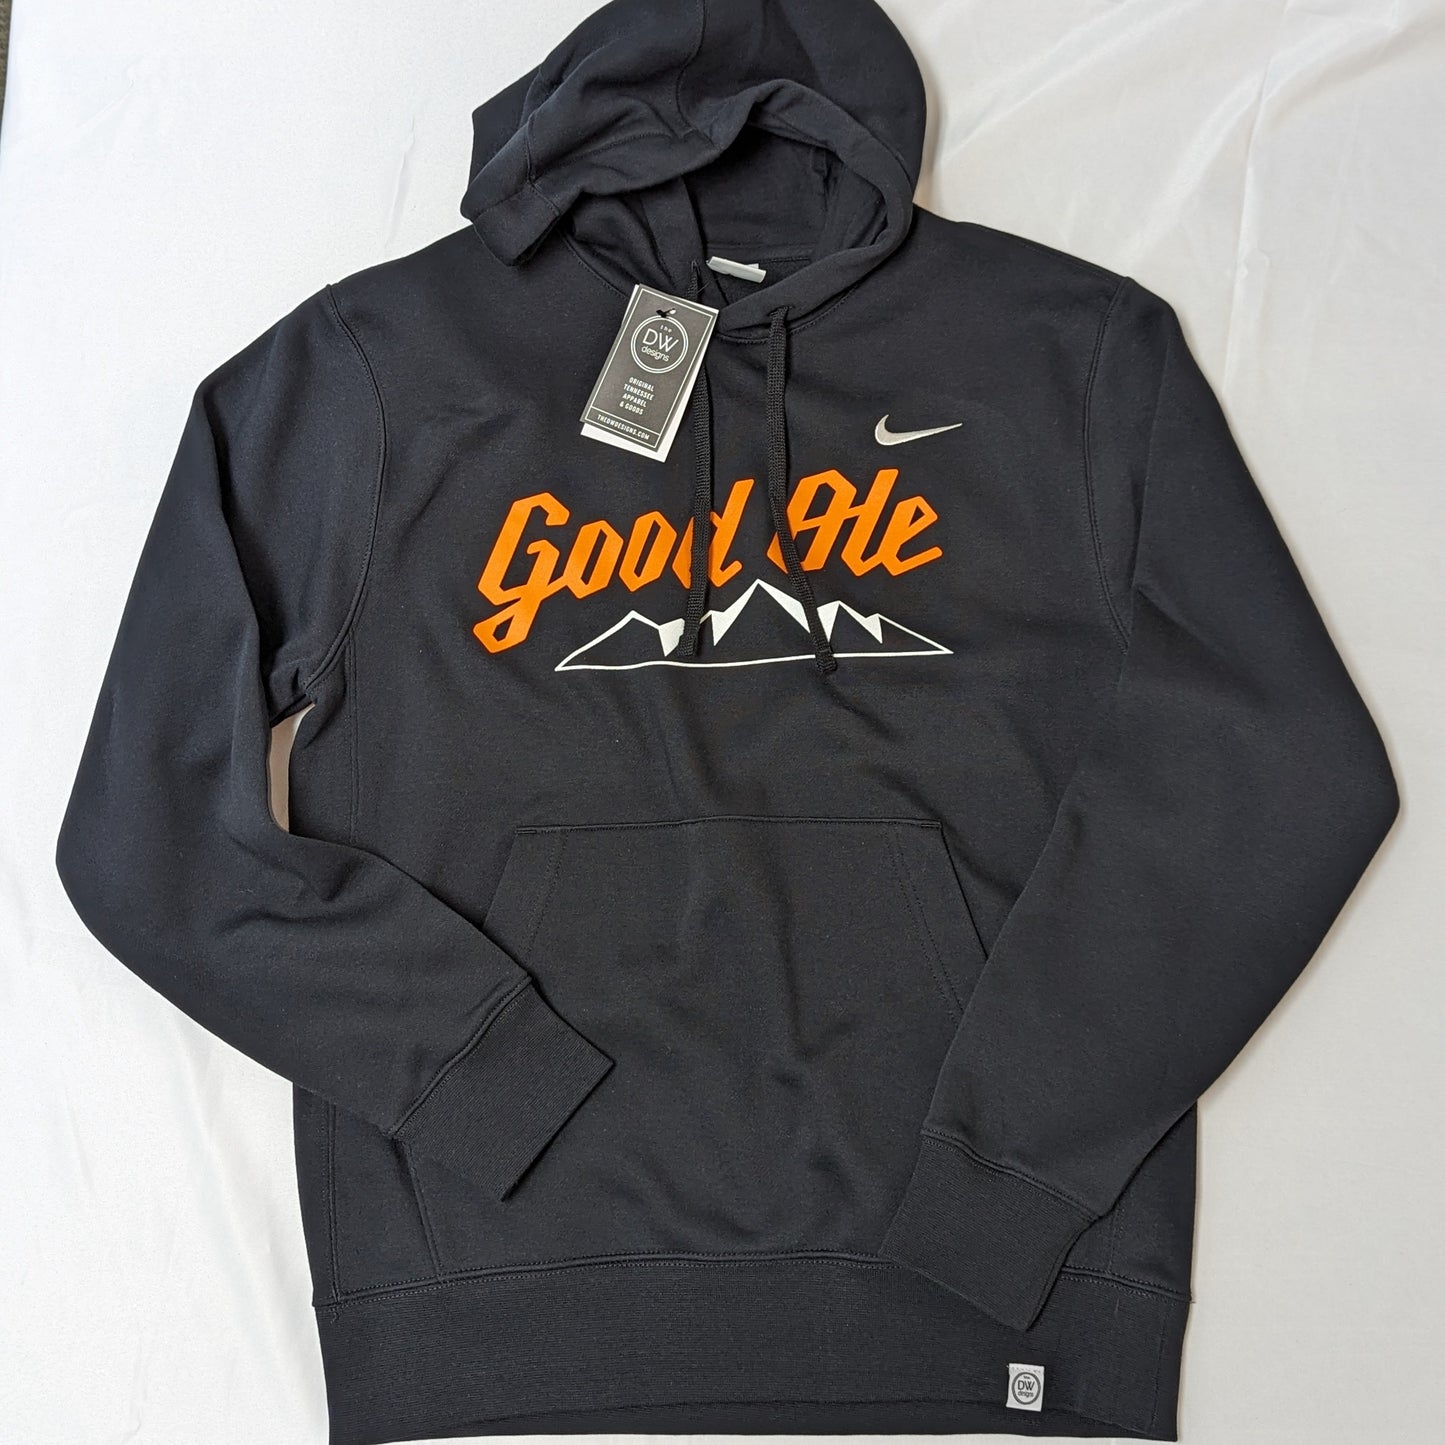 The Nike Good Ole 4.0 Hoodie features the words good ole above mountains. Sold by The DW Designs, Knoxville, TN.